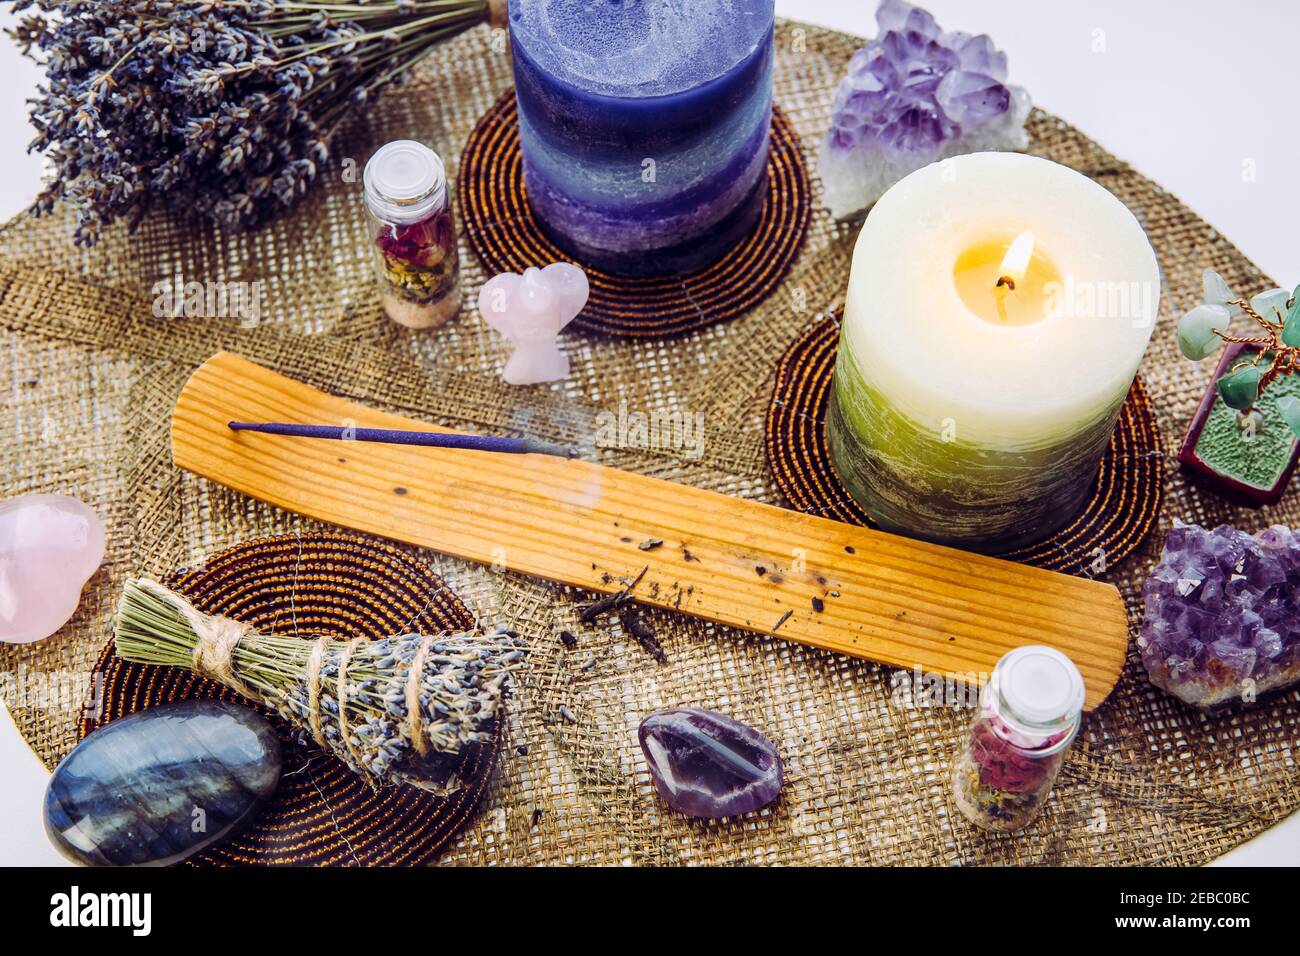 Small good feng shui altar in home on window sill on leaf shape table mat, snowy Nordic nature on background. Incense candle smoking, gemstones for de Stock Photo